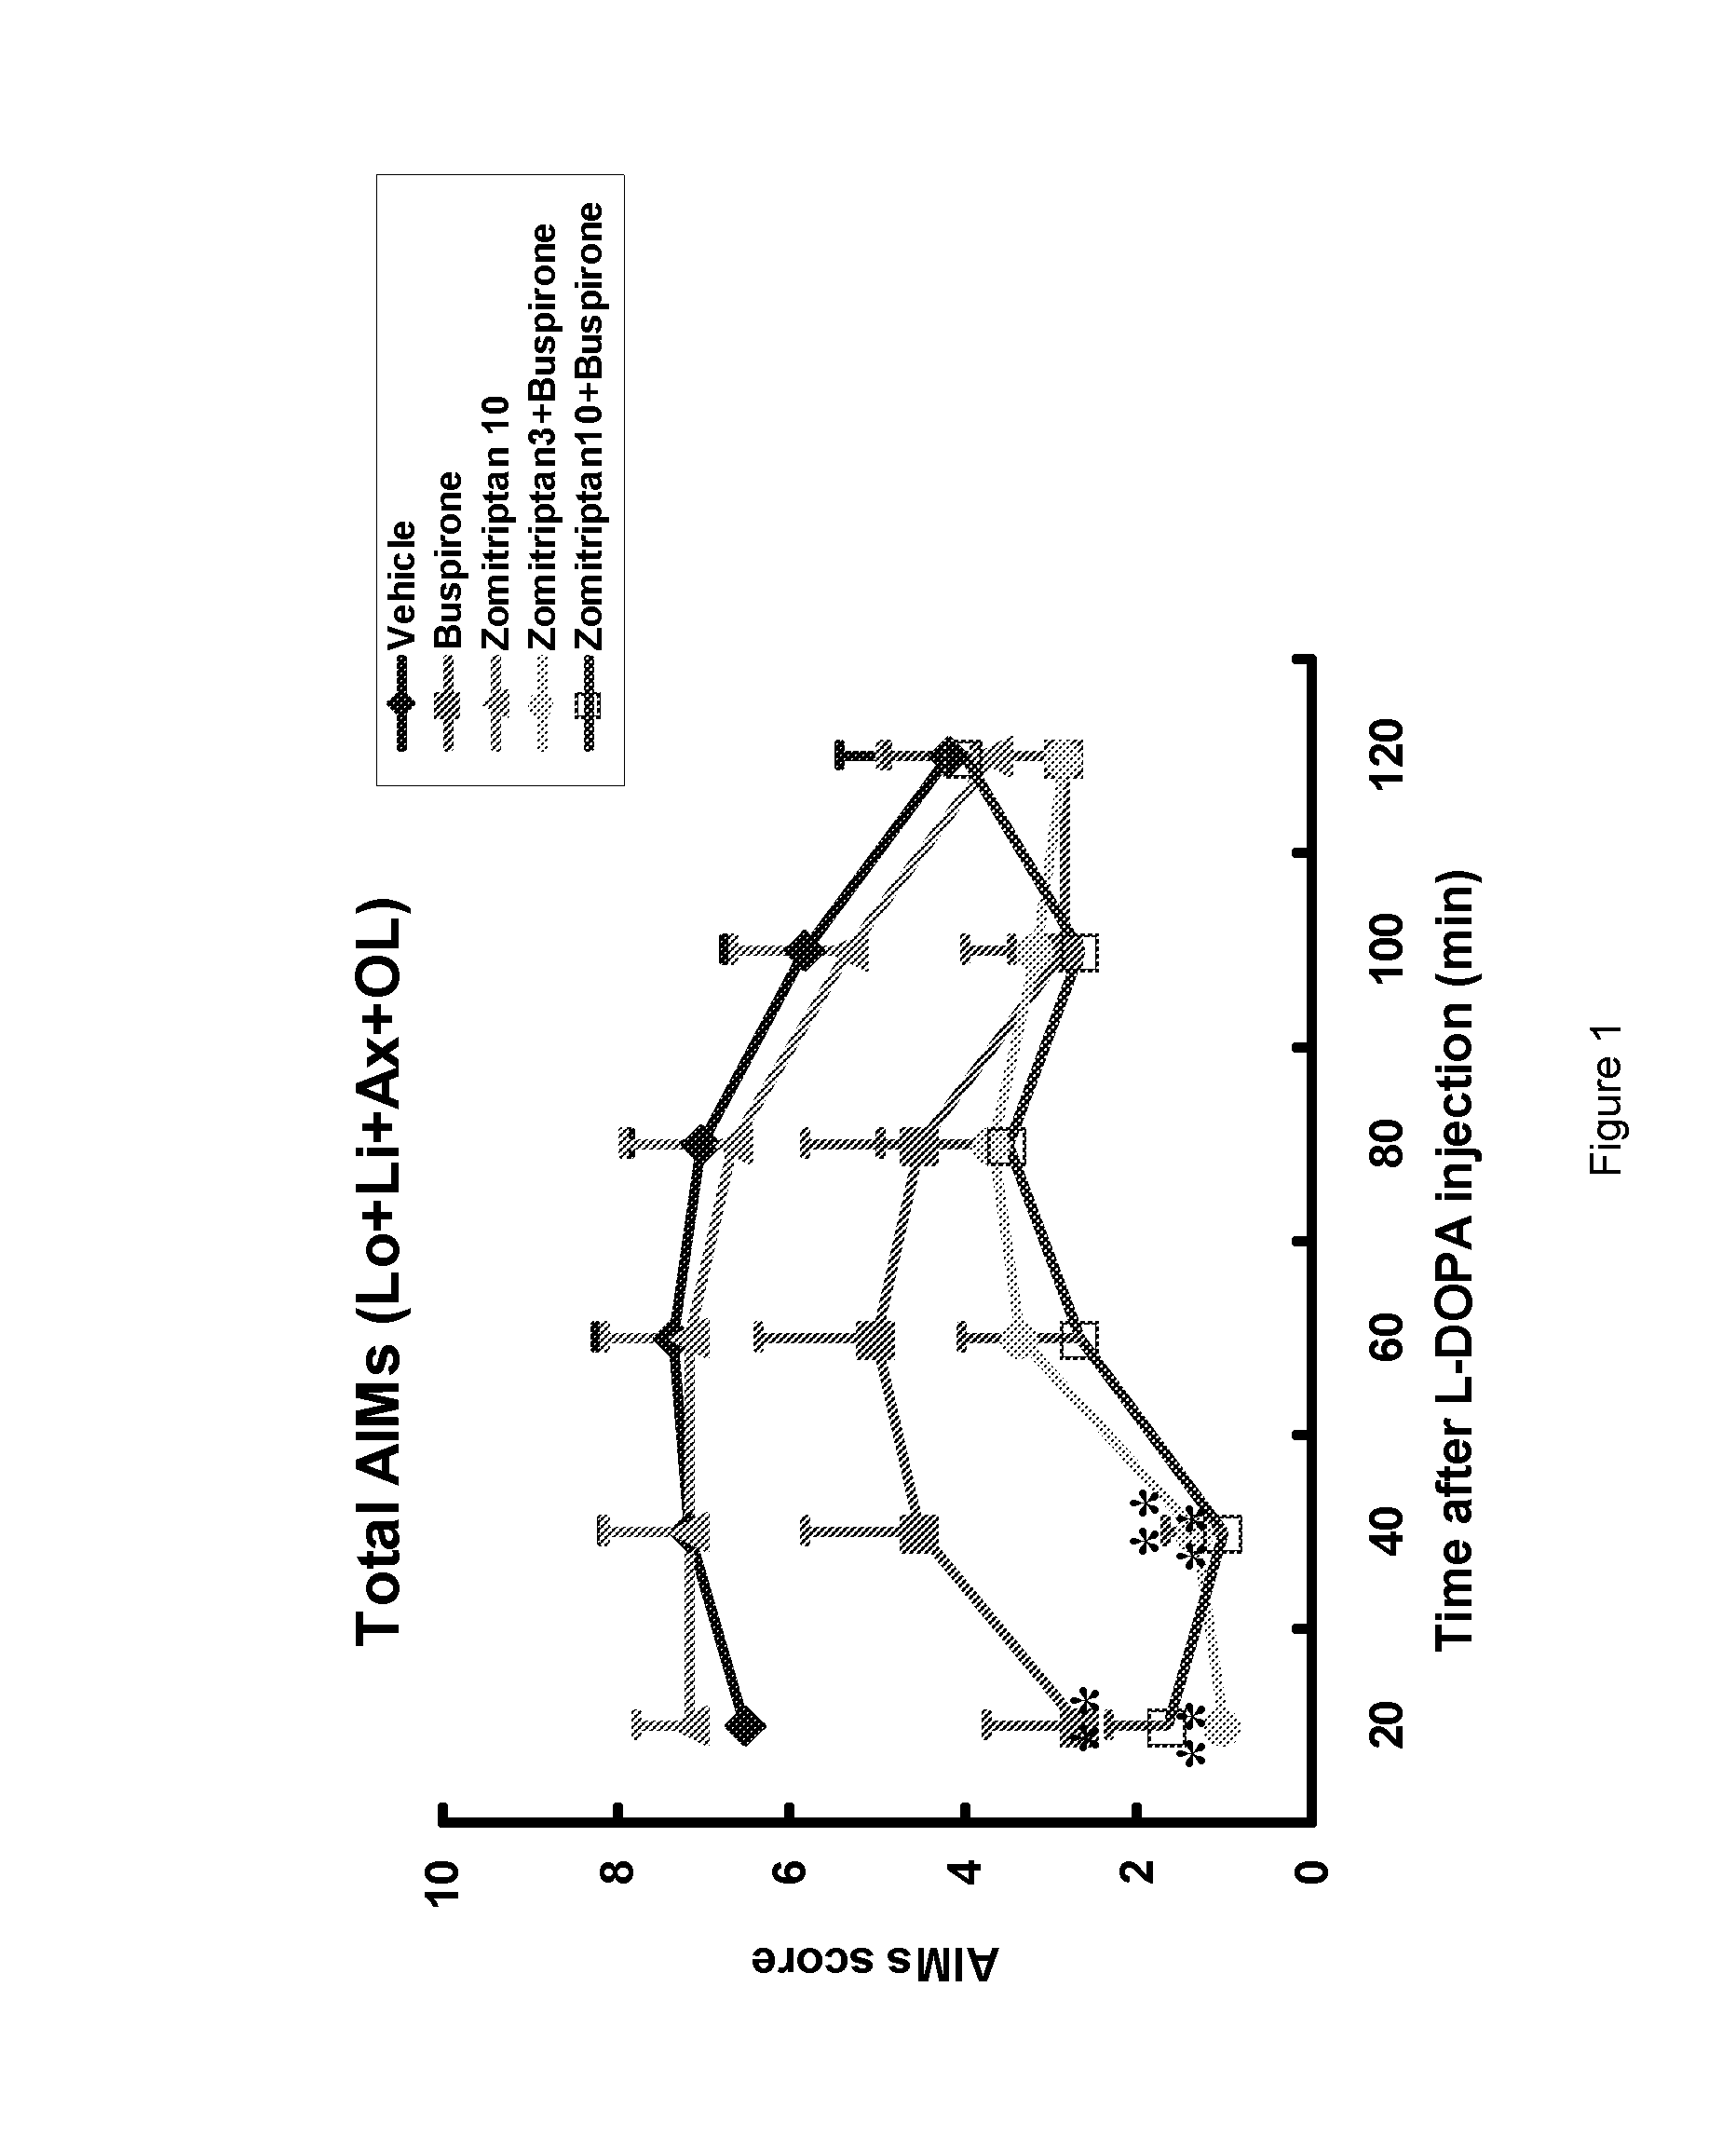 Combinations of serotonin receptor agonists for treatment of movement disorders